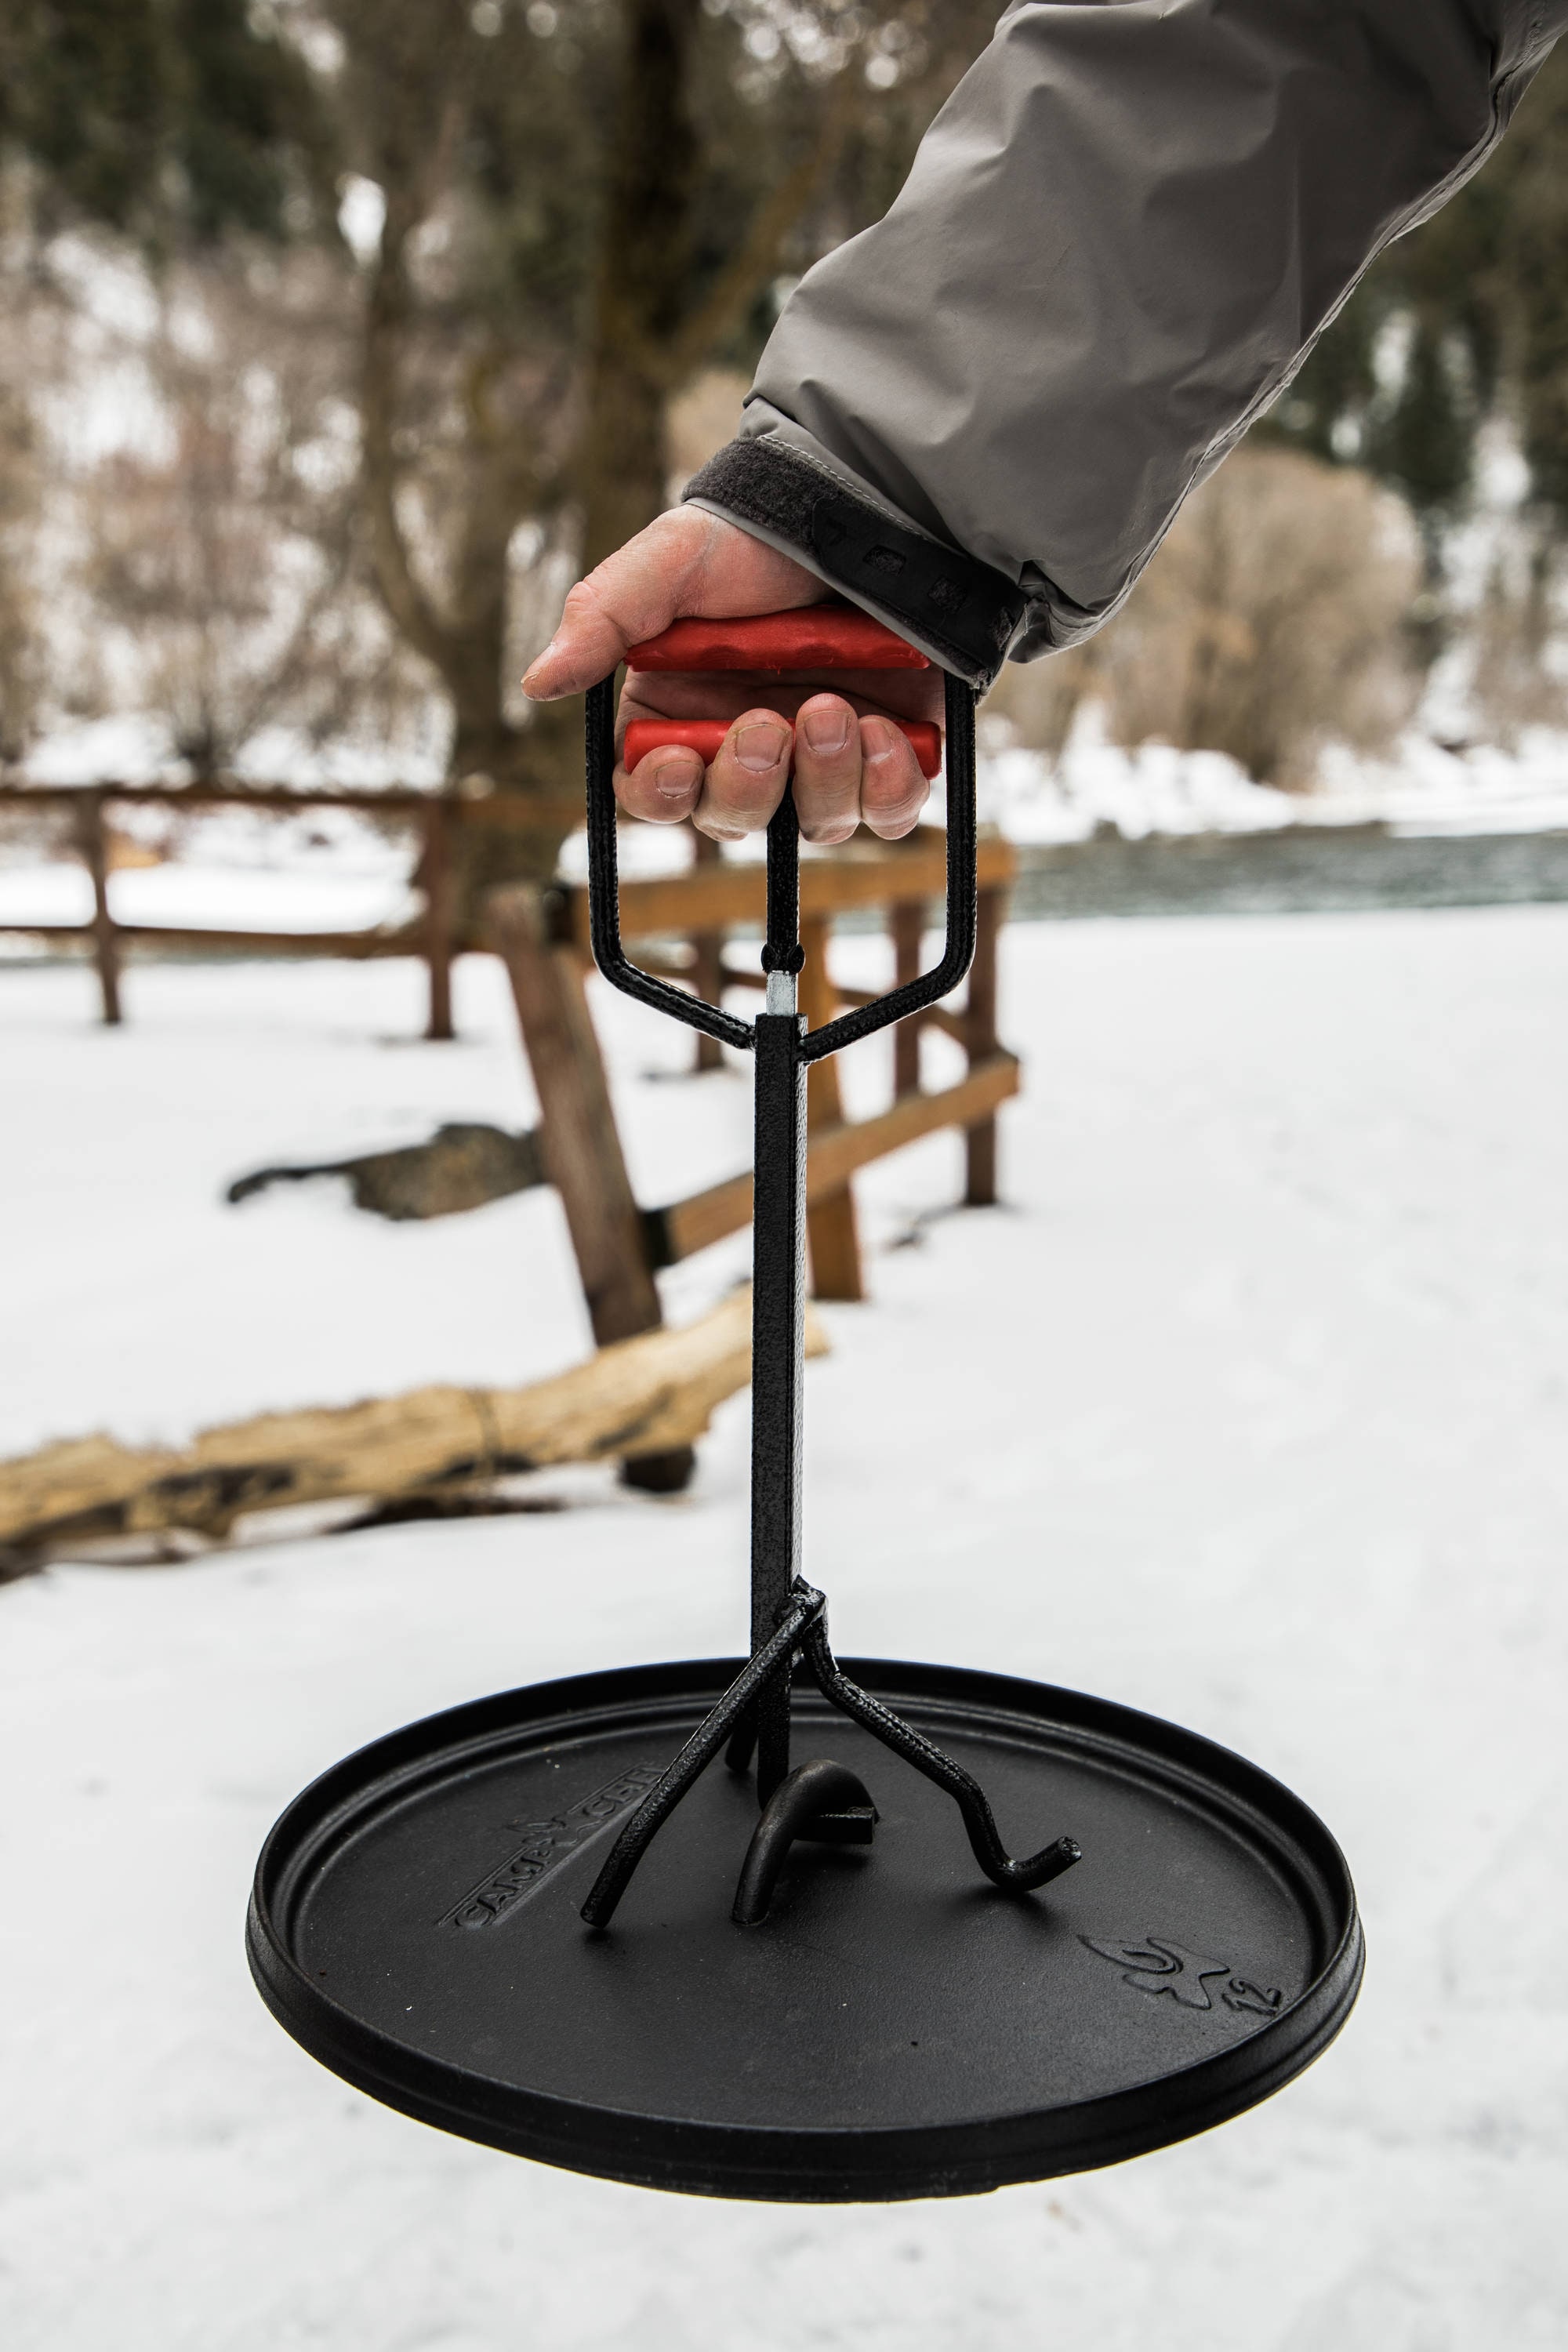 Camp Chef Dutch Oven Lid Lifter - 22 In, Cast-Iron